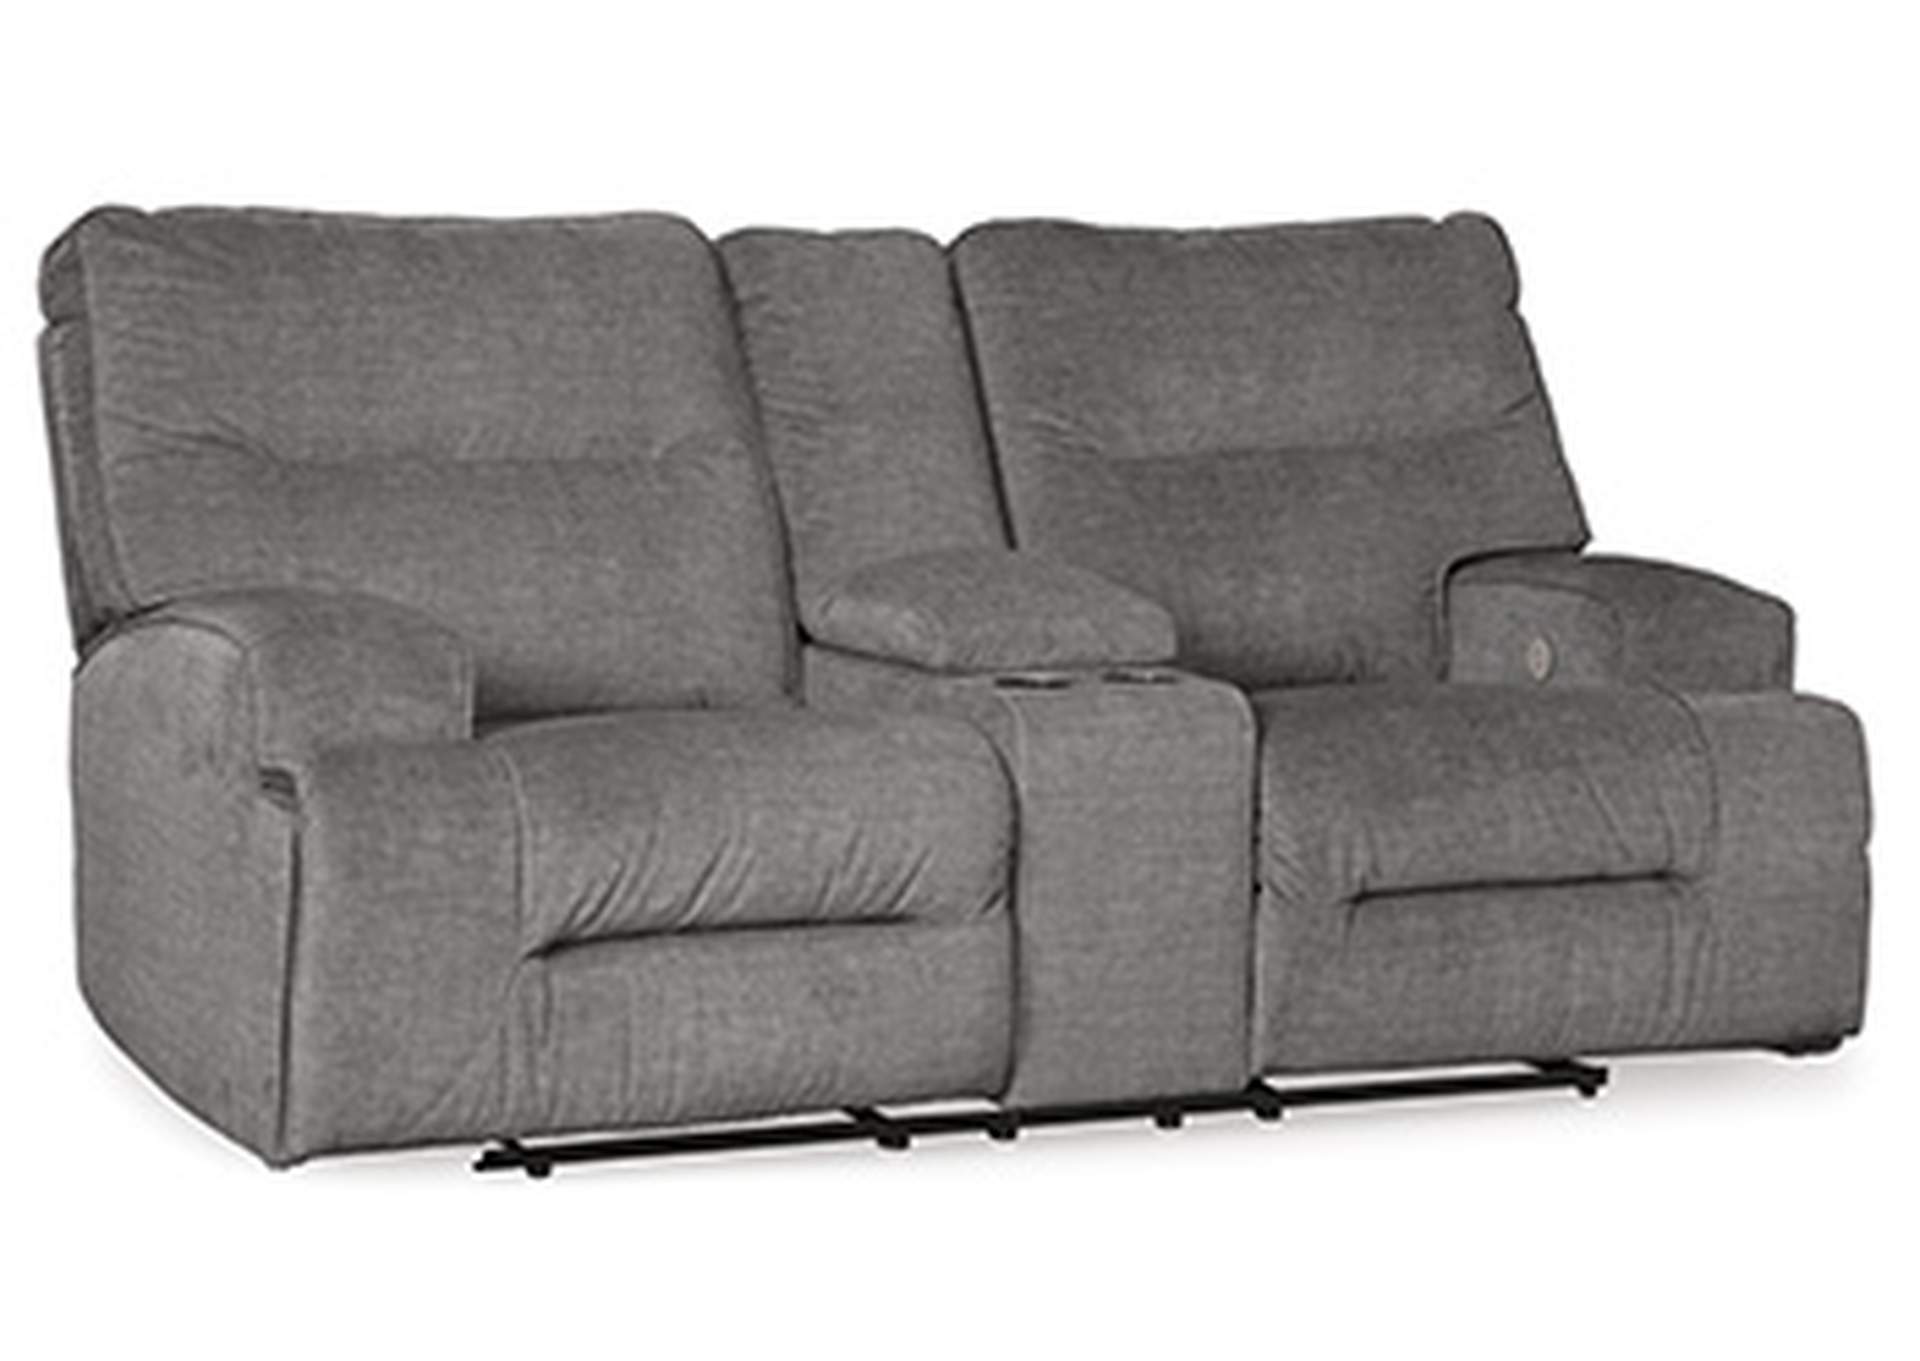 Coombs Power Reclining Loveseat with Console,Signature Design By Ashley